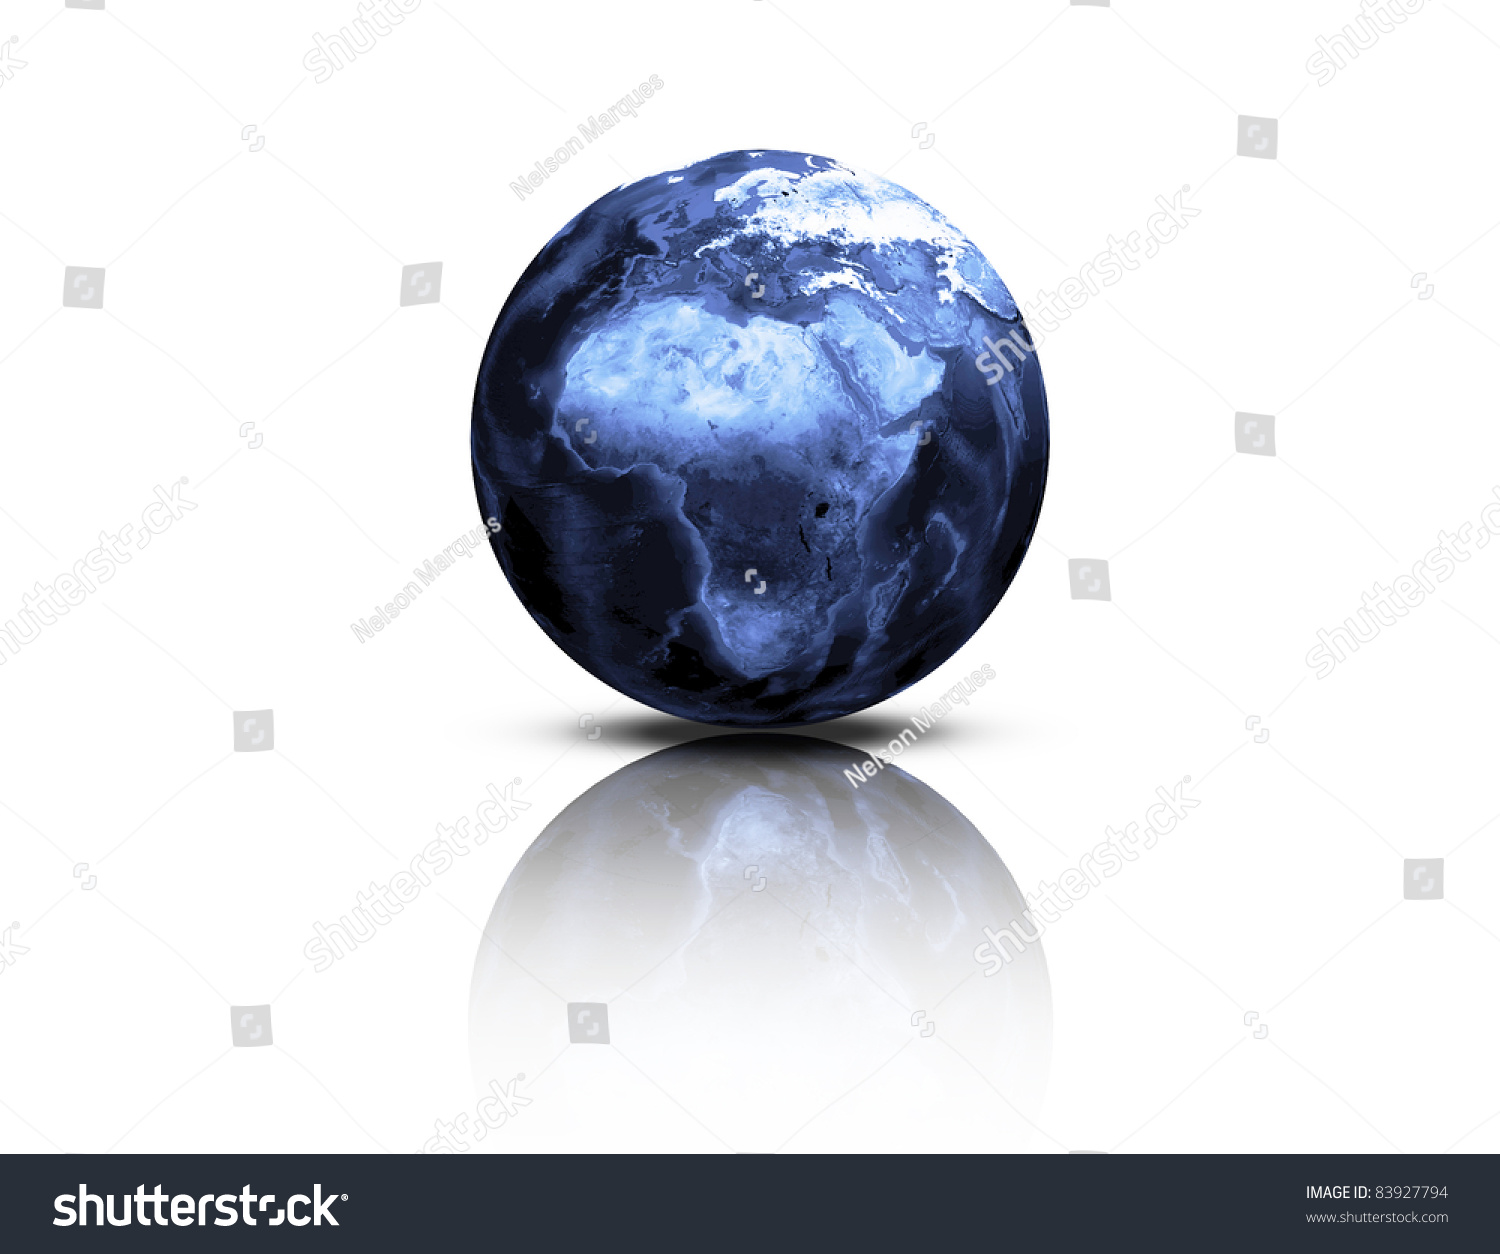 Image Of A The Earth Isolated On A White Background. Stock Photo